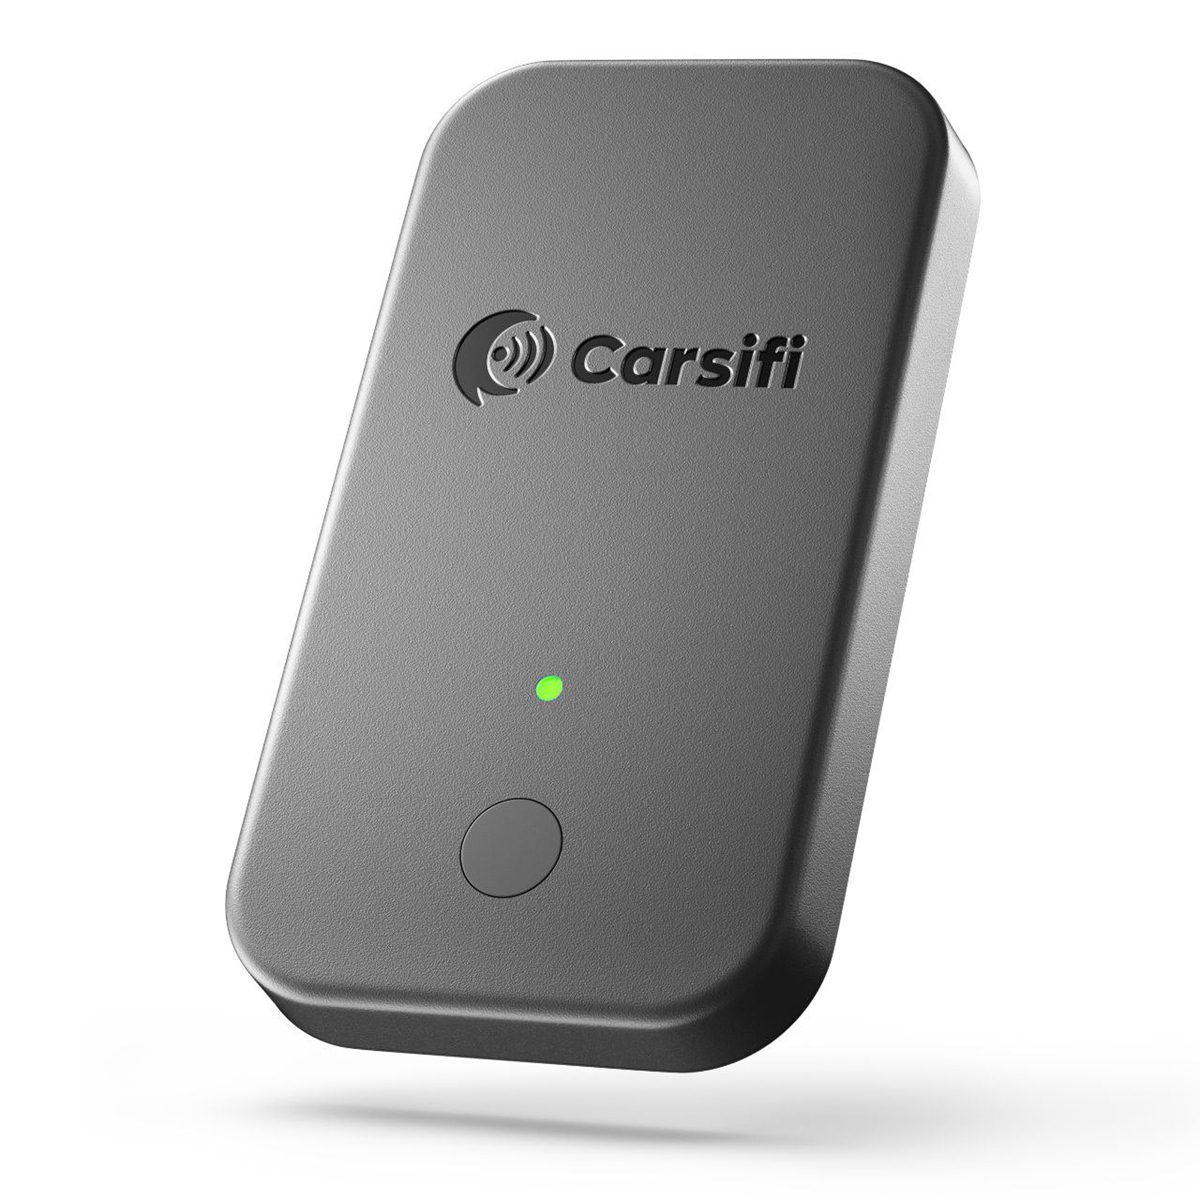 Rendering of the Carsifi Android Auto adapter.